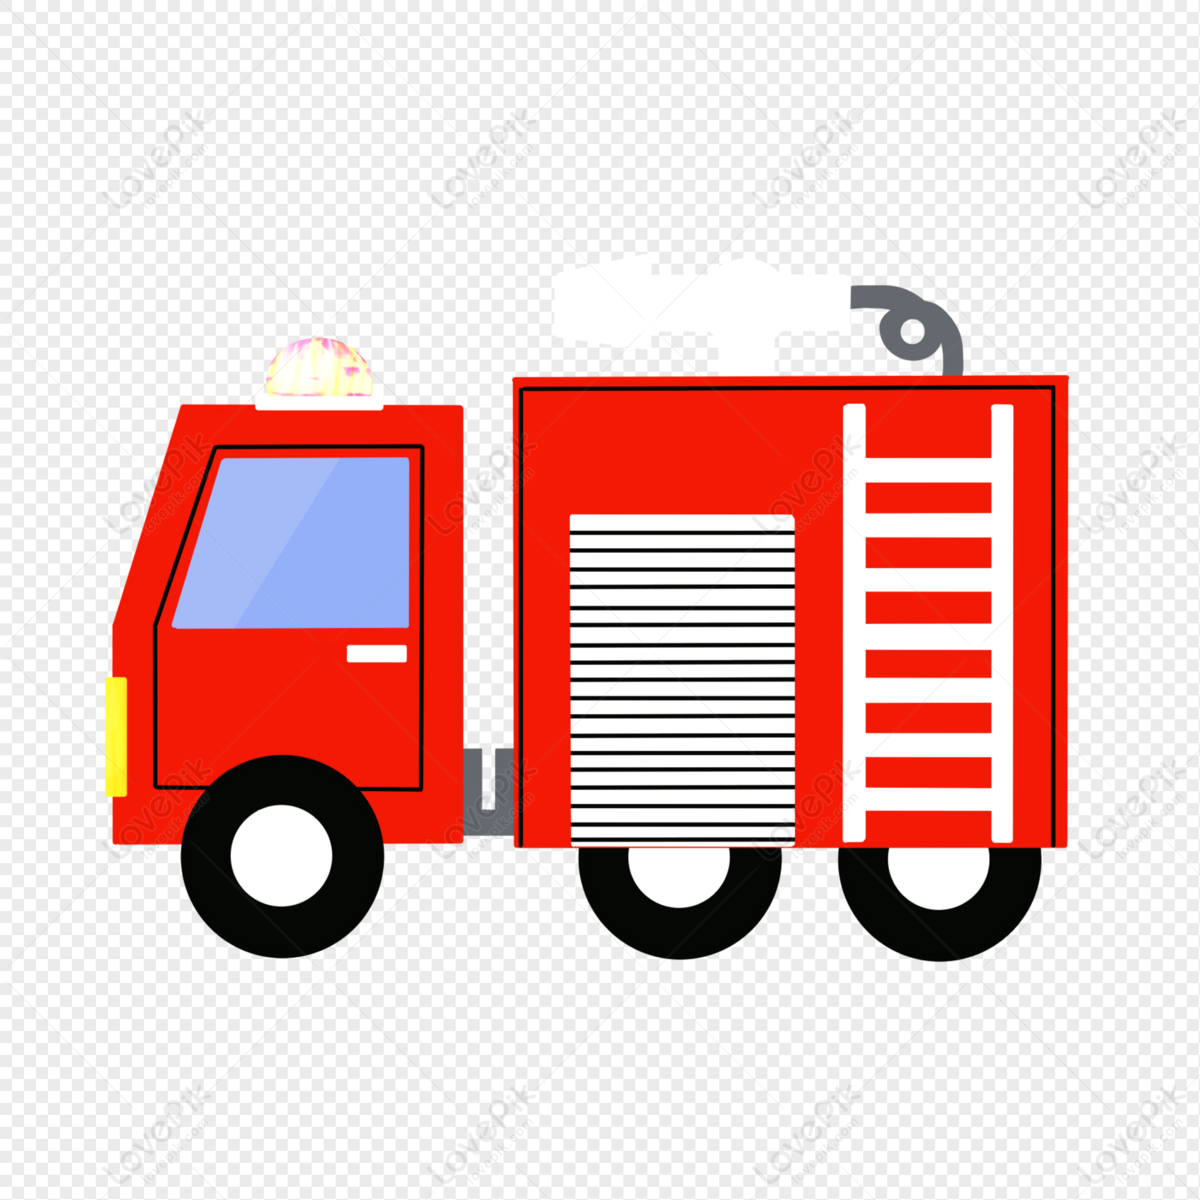 Cartoon Fire Truck PNG Transparent Background And Clipart Image For Free  Download - Lovepik | 401466940